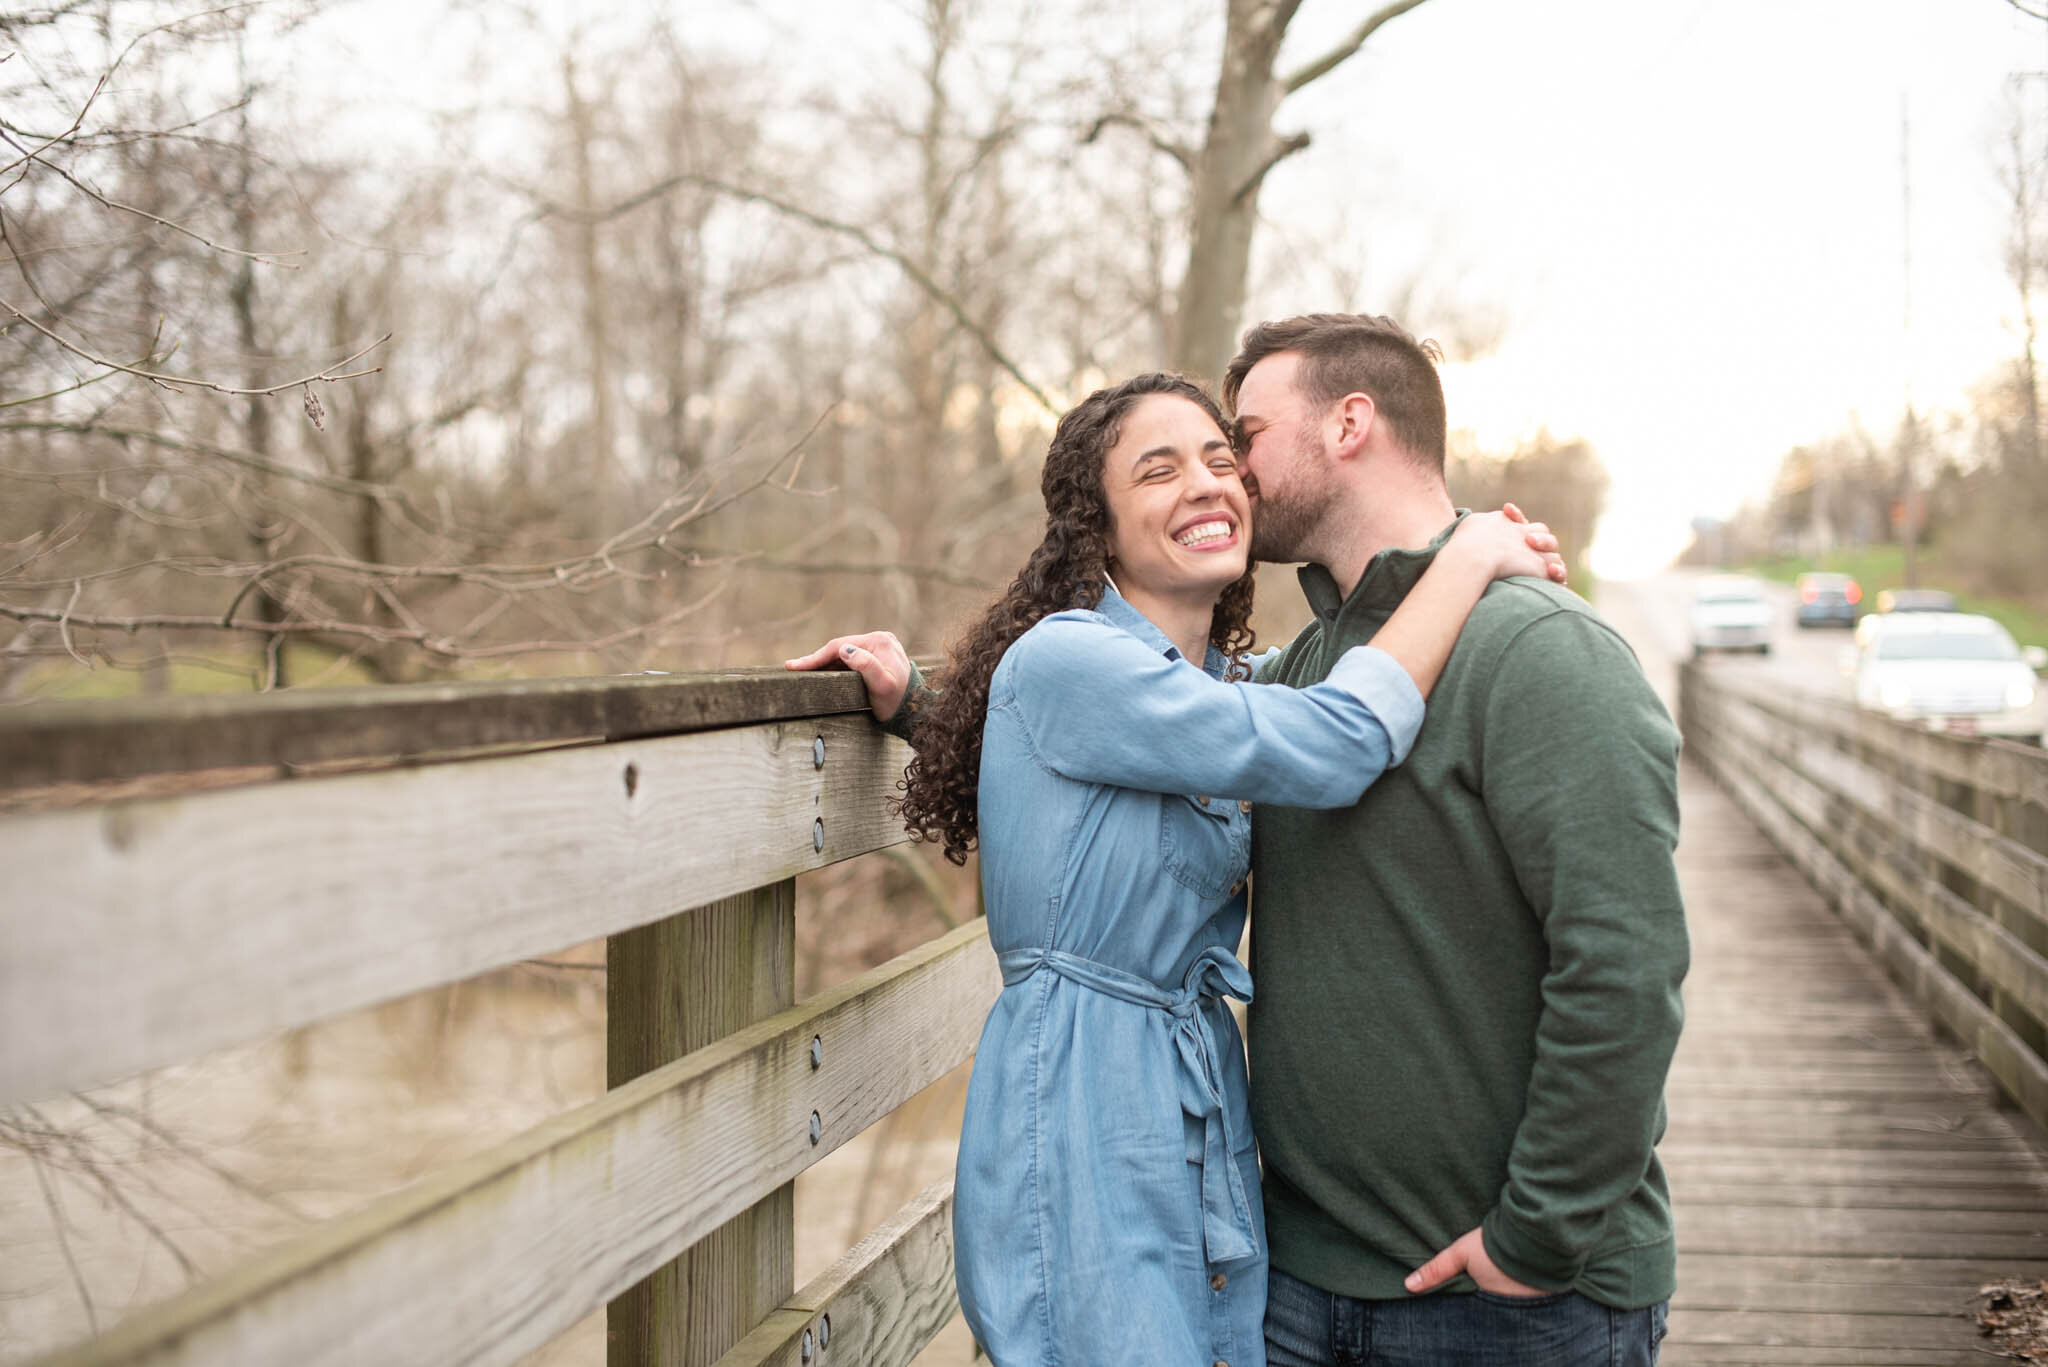 Shadyside Park Engagement Photos in Anderson, Indiana-1269.jpg